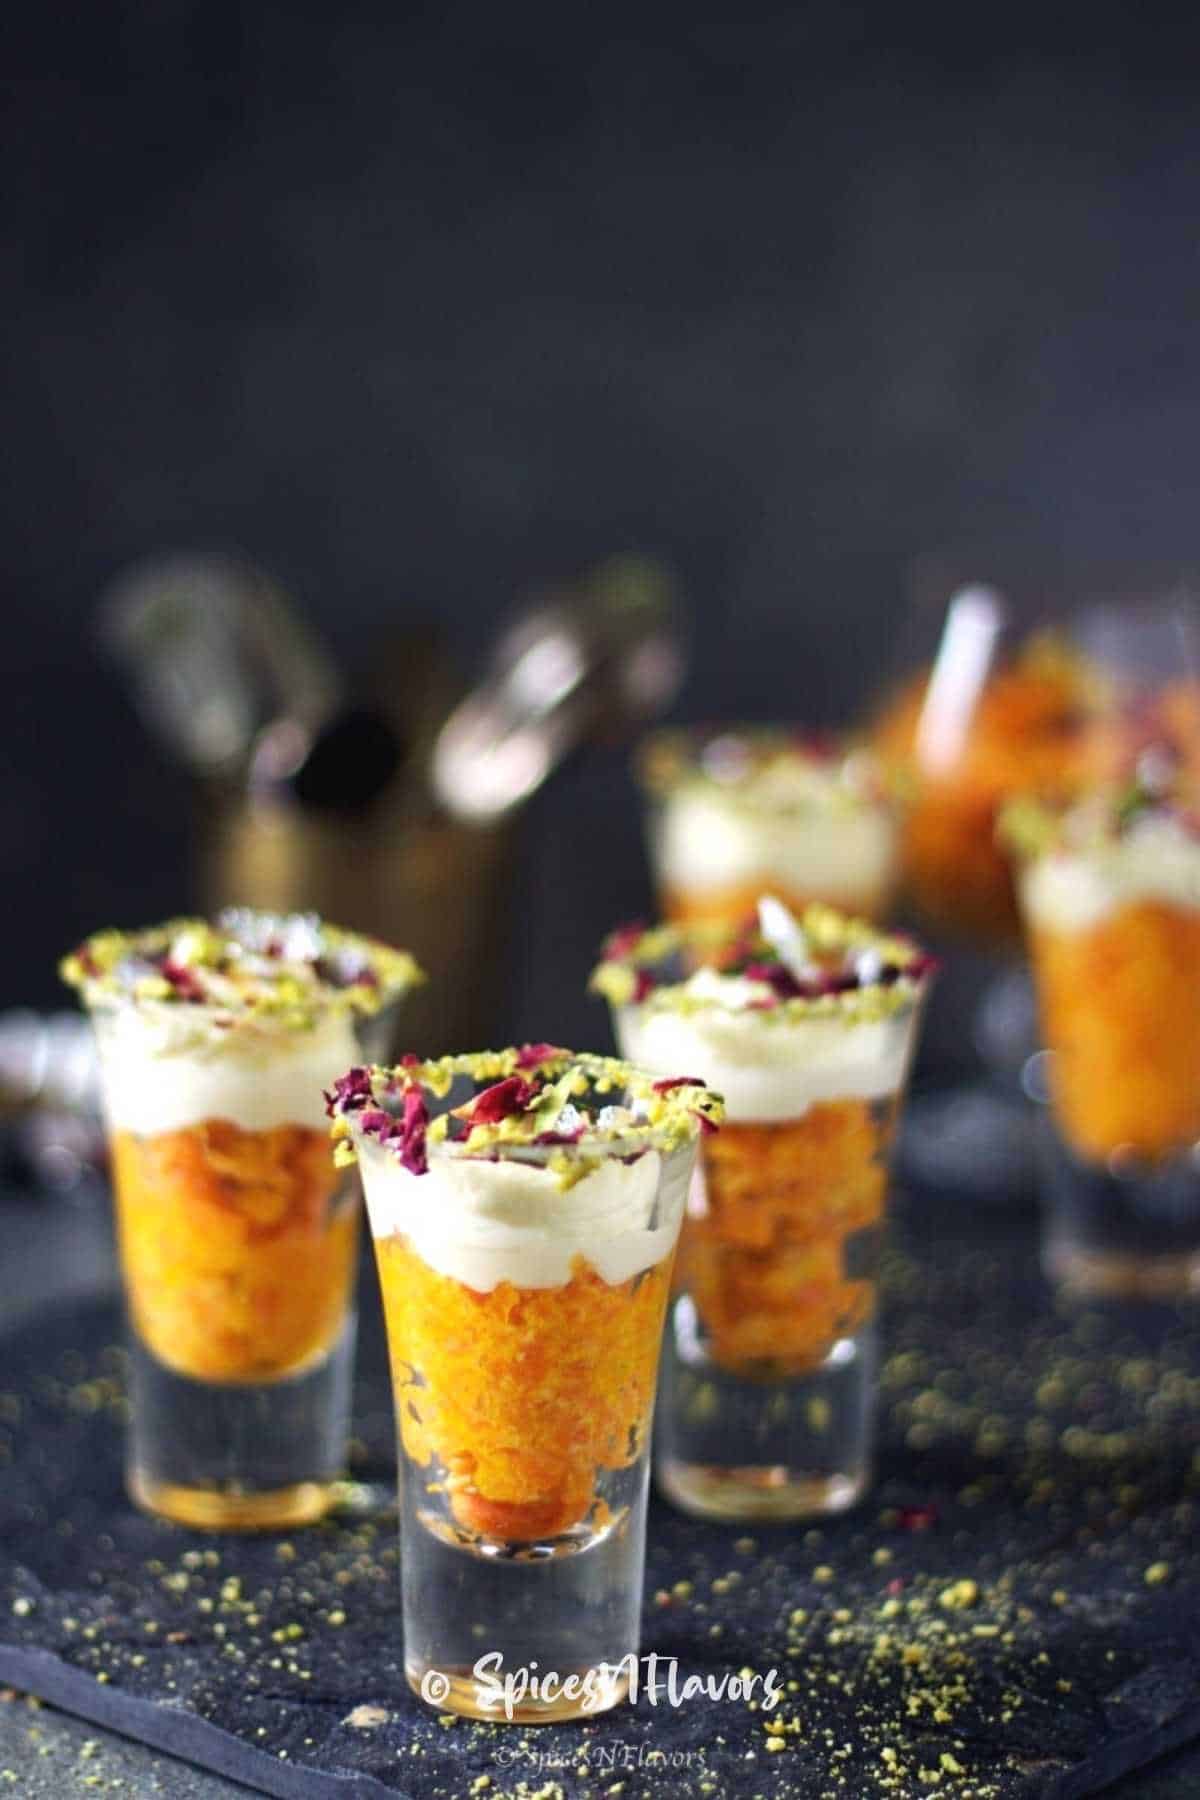 gajar halwa served in shot glasses with whipped cream on top